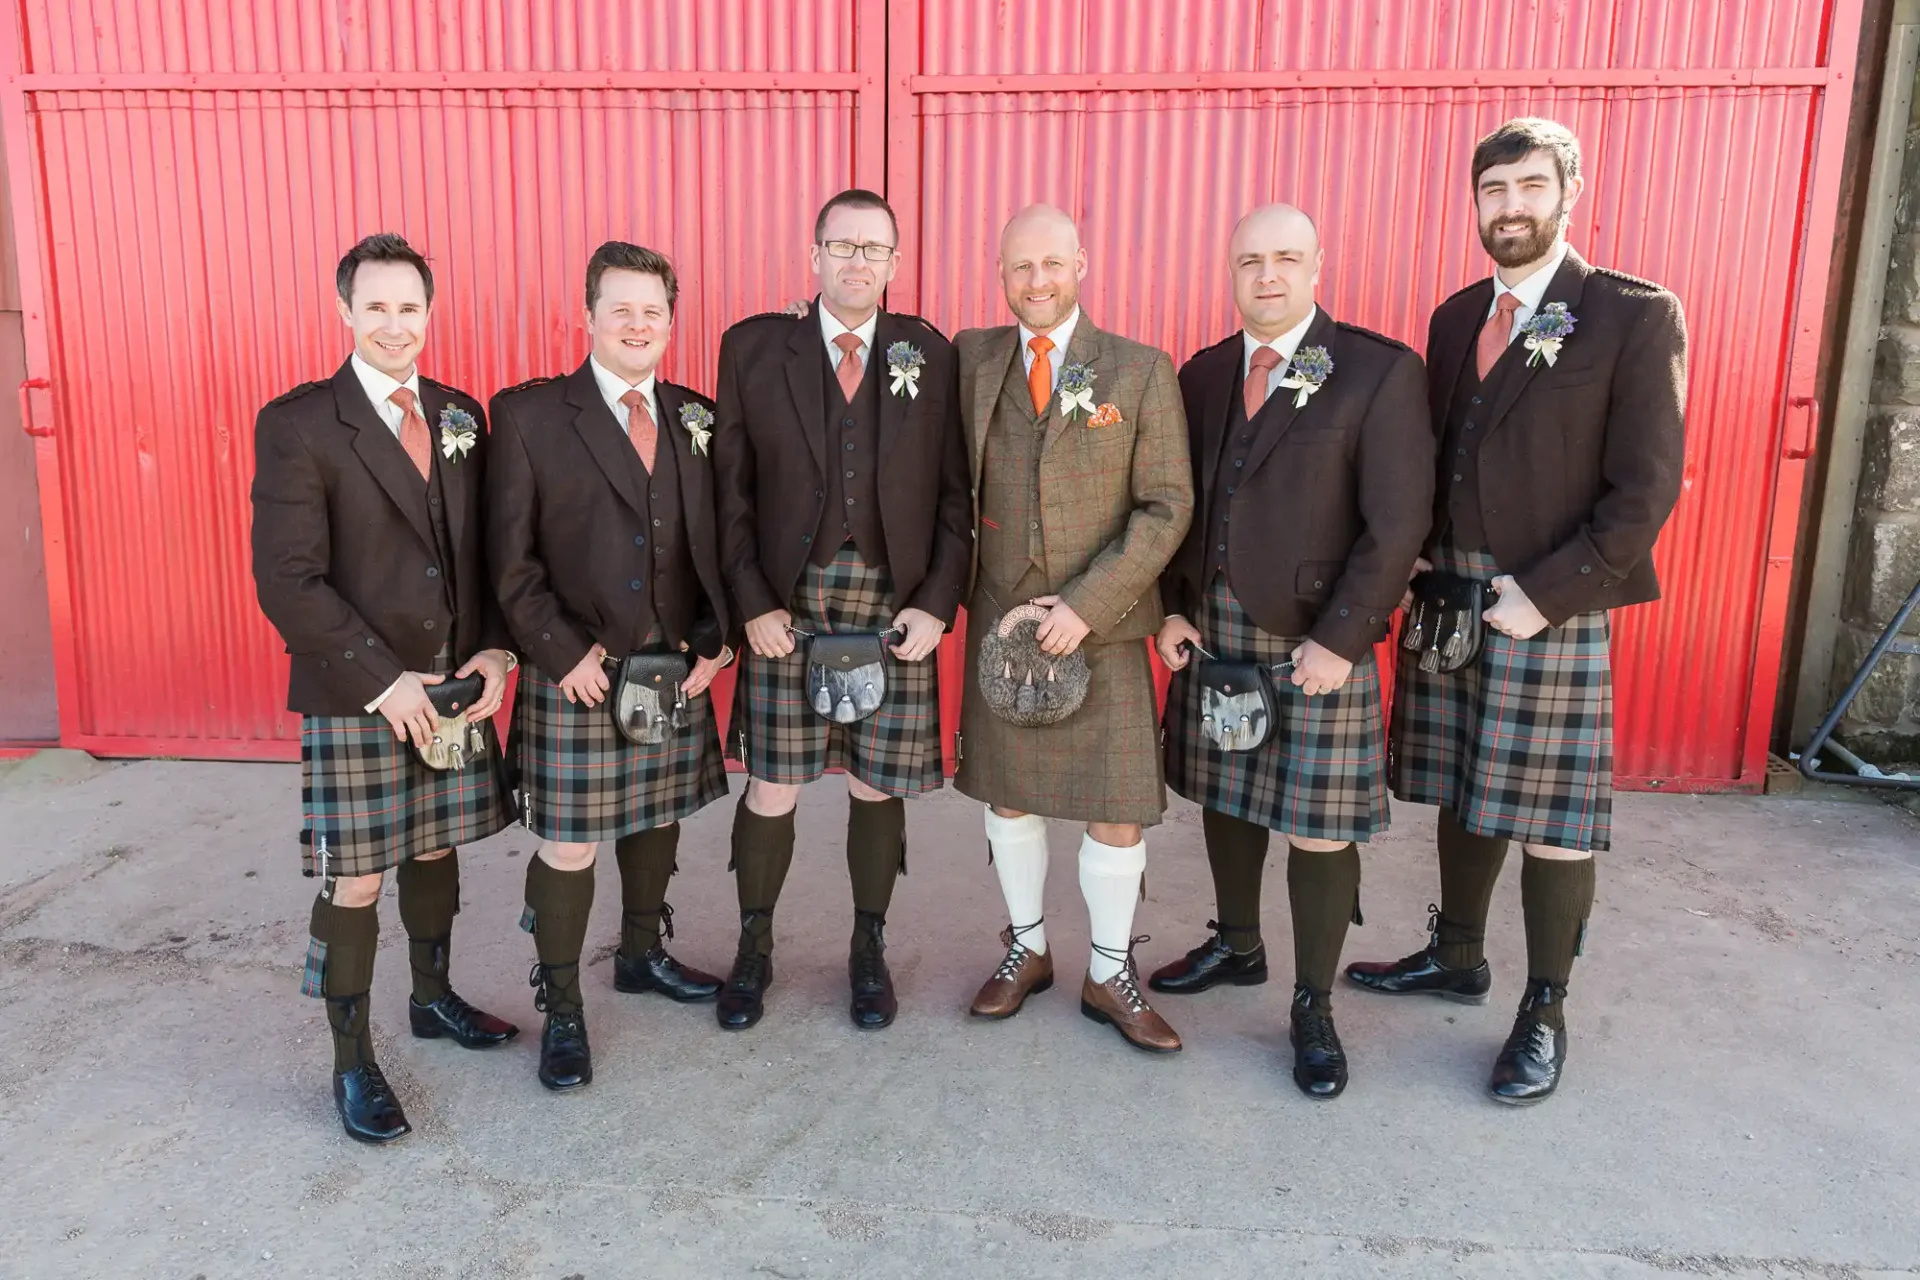 Six men wearing traditional scottish kilts and jackets pose for a photo in front of a red barn door.